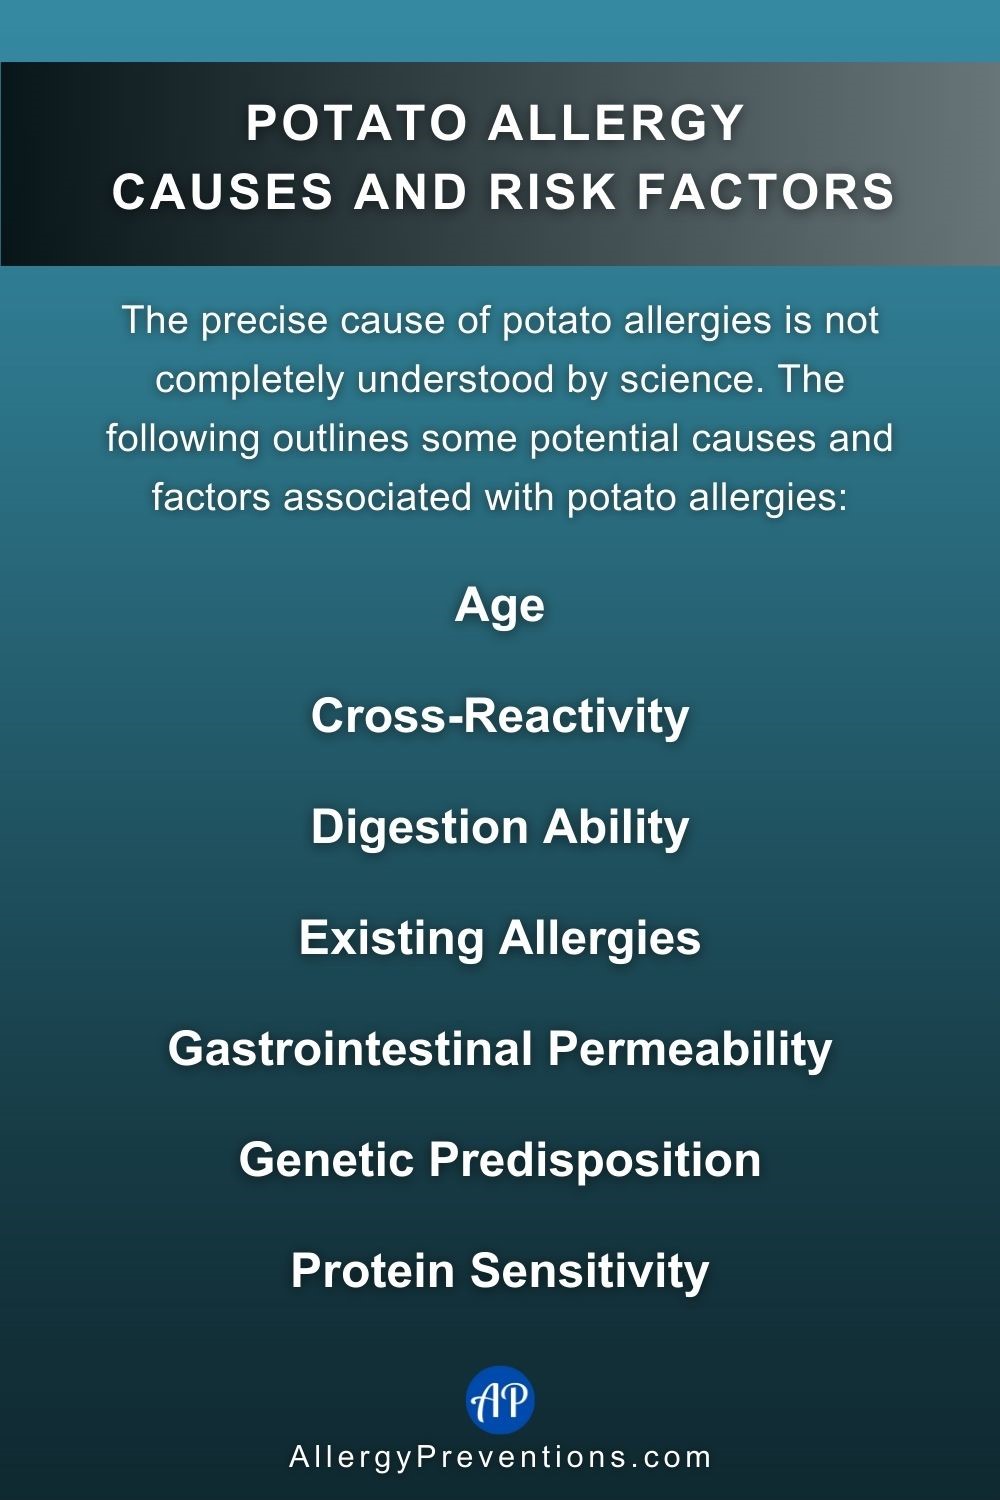 Potato allergy causes and risk factors infographic. The precise cause of potato allergies is not completely understood by science. The following outlines some potential causes and factors associated with potato allergies: Age, Cross-Reactivity, Digestion Ability, Existing Allergies, Gastrointestinal Permeability, Genetic Predisposition, Protein Sensitivity